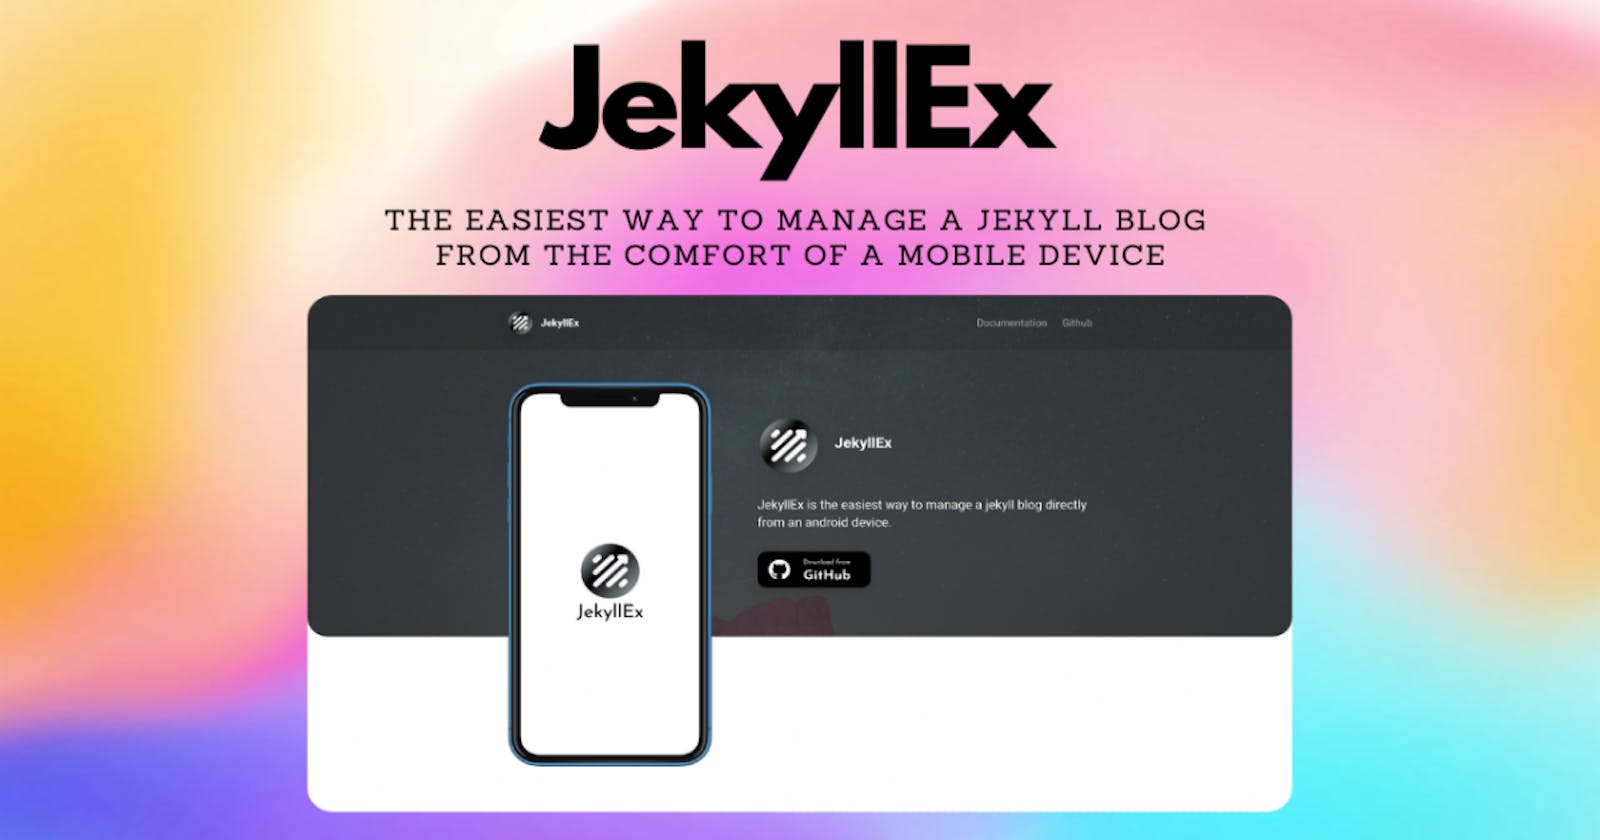 Introducing JekyllEx - The easiest way to manage a Jekyll blog from an Android device!